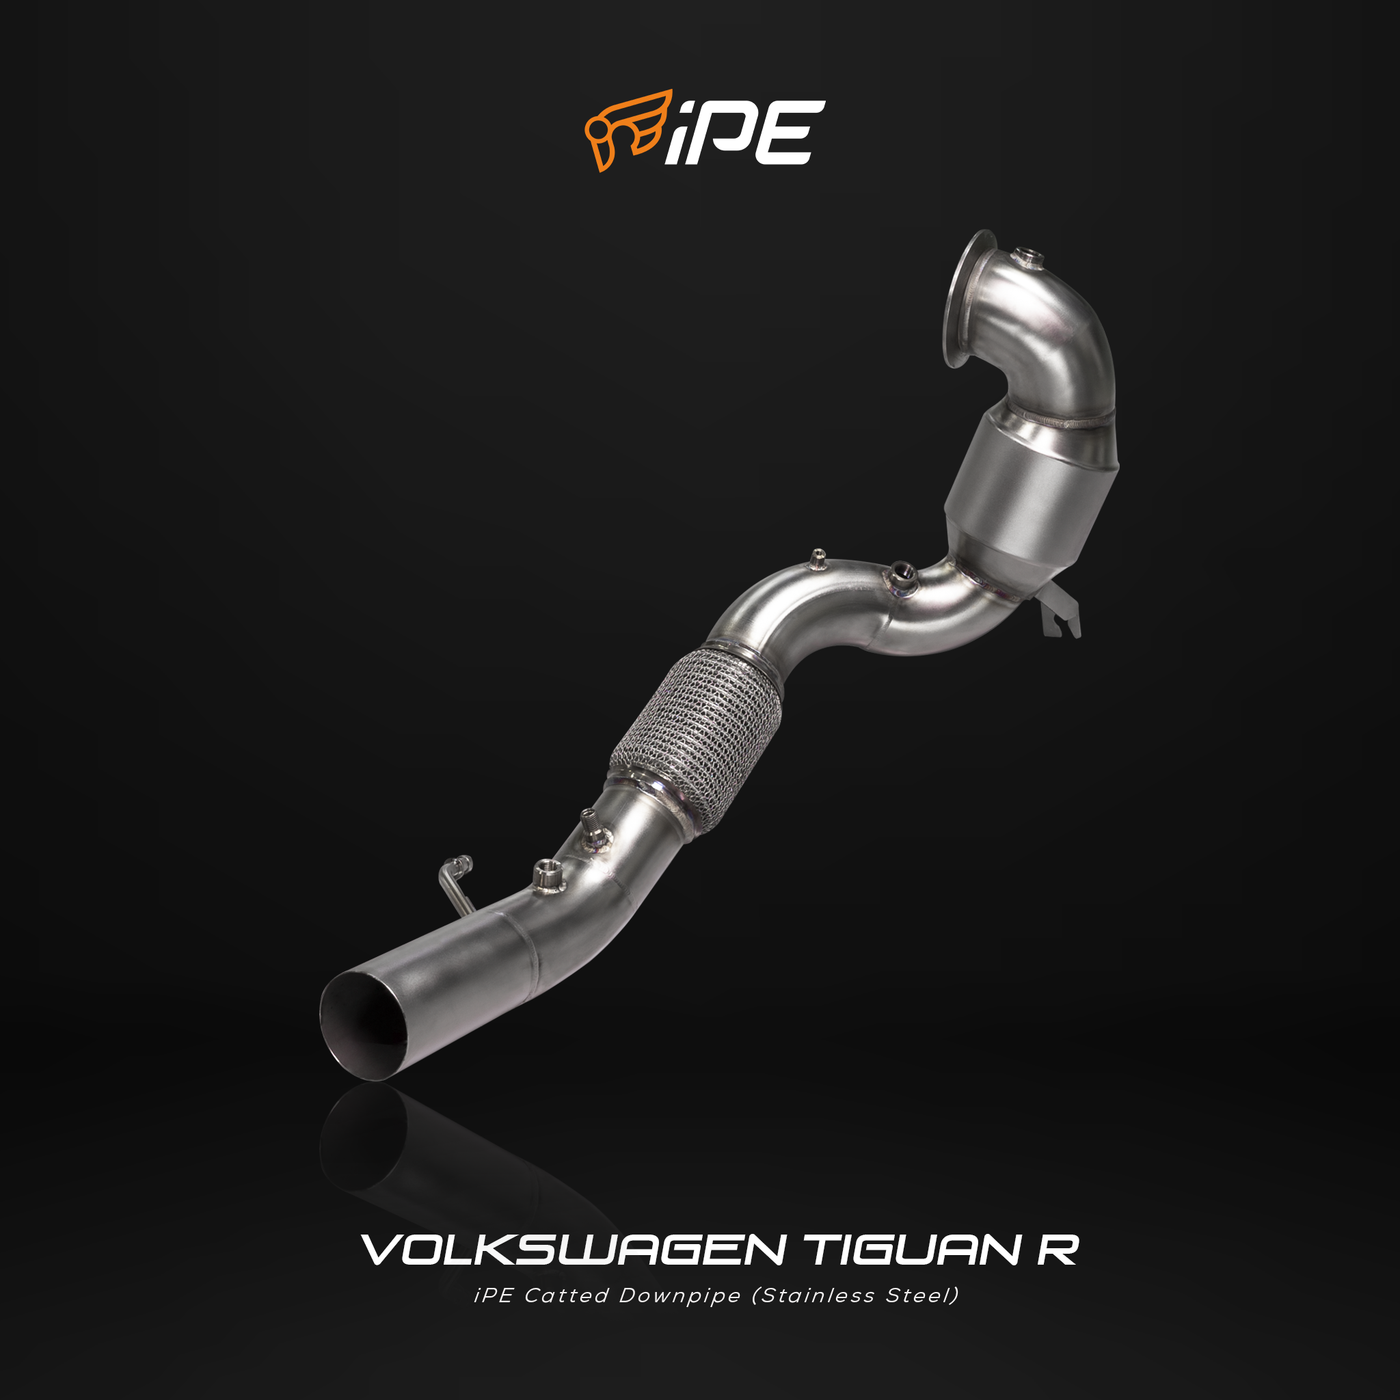 product image - Volkswagen Tiguan R Full Exhaust System - catted downpipe -  stainless steel 